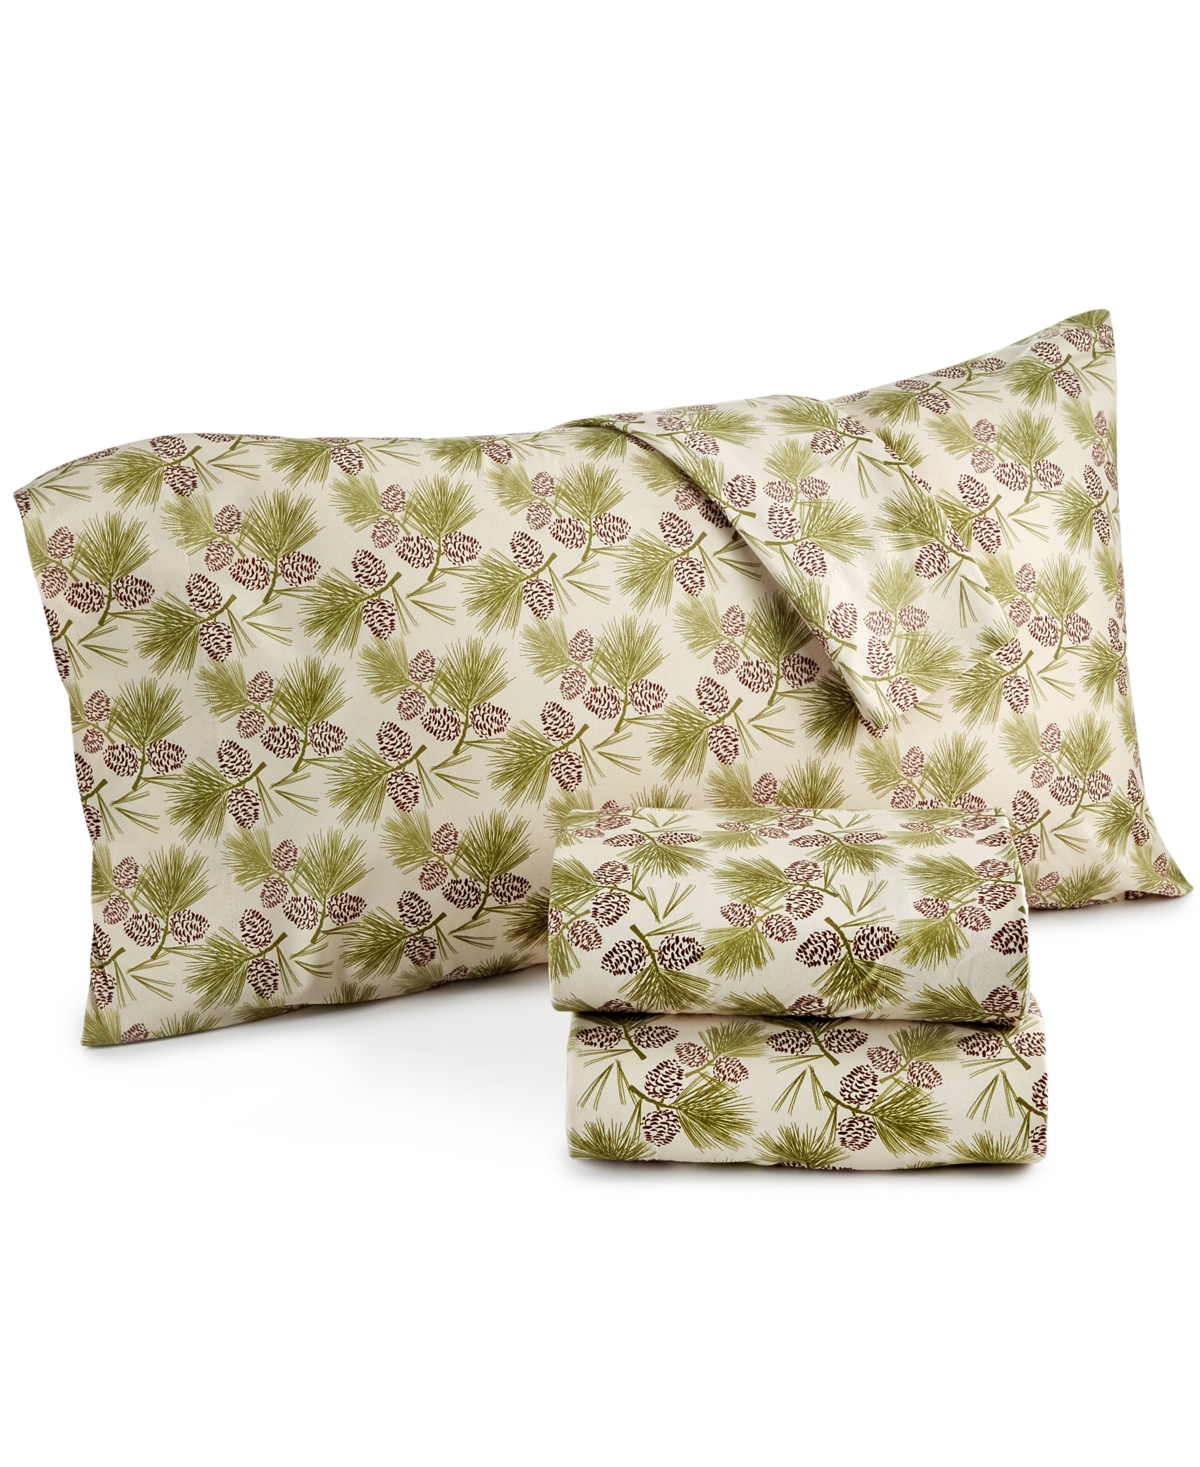 Shavel Micro Flannel Printed California King 4-pc Sheet Set In Pinecone Natural